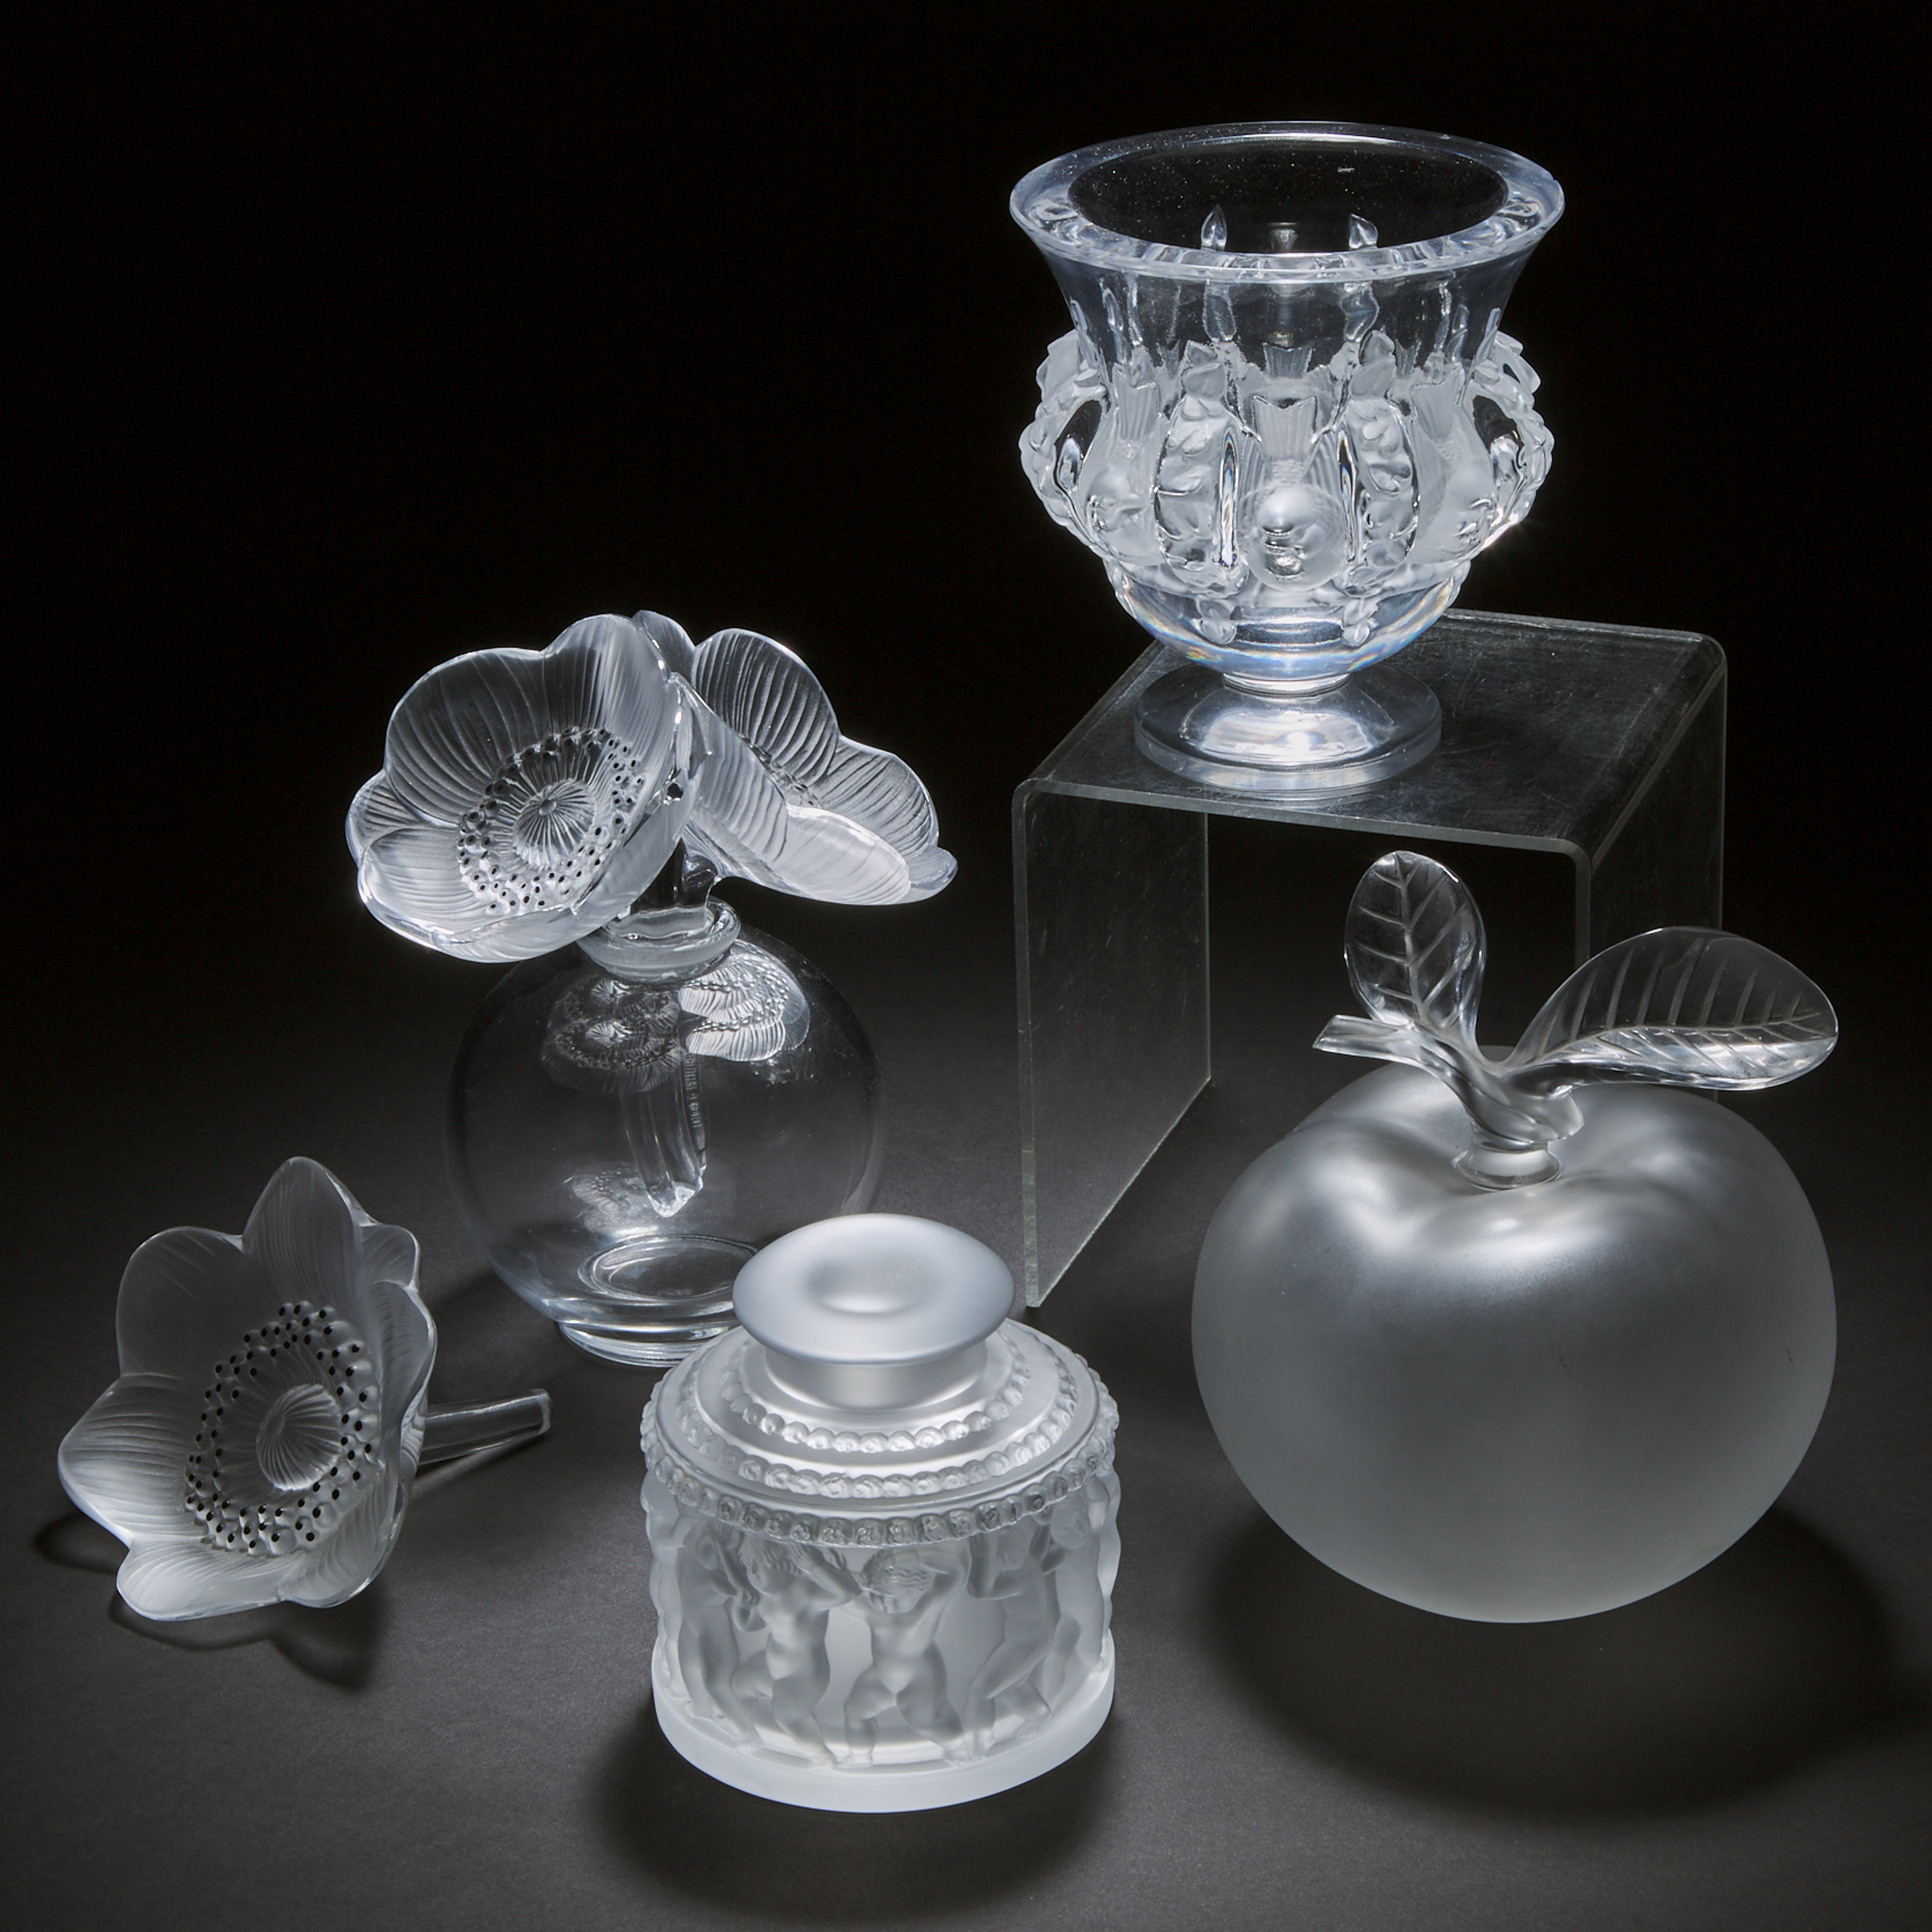 Group of Lalique Moulded and Frosted Glass Articles, 20th century